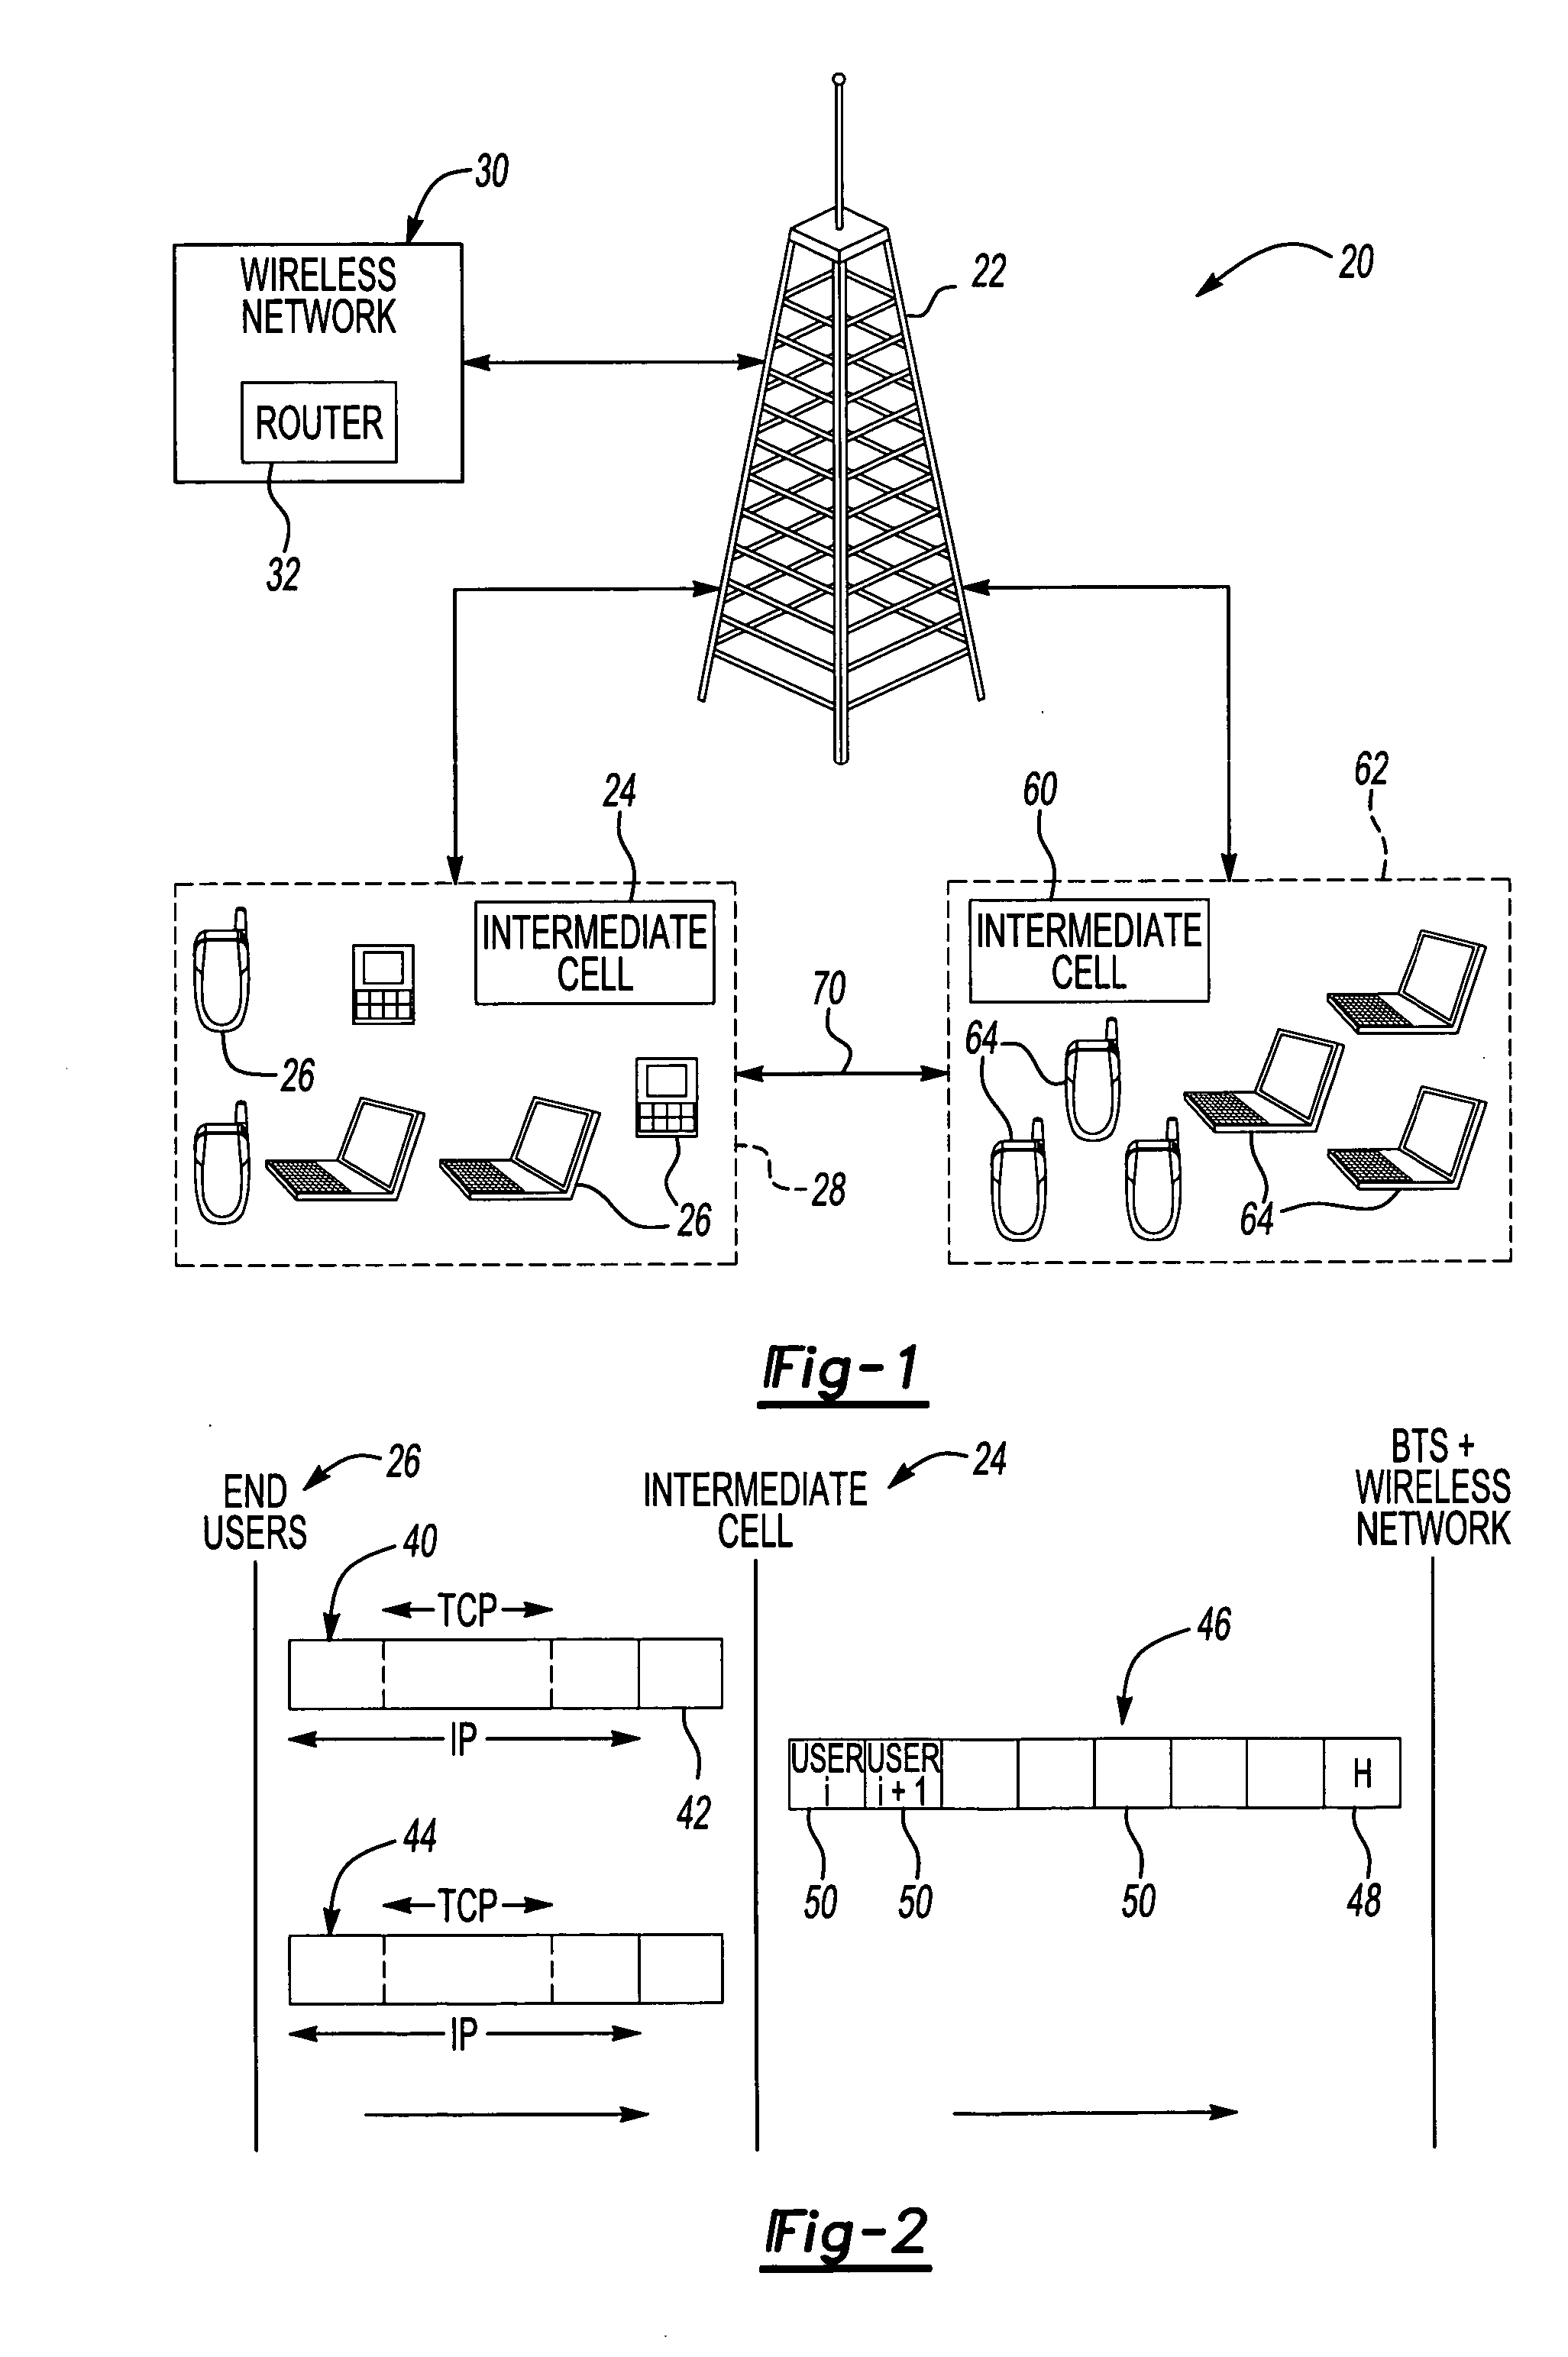 Wireless communication system facilitating communications through local networks